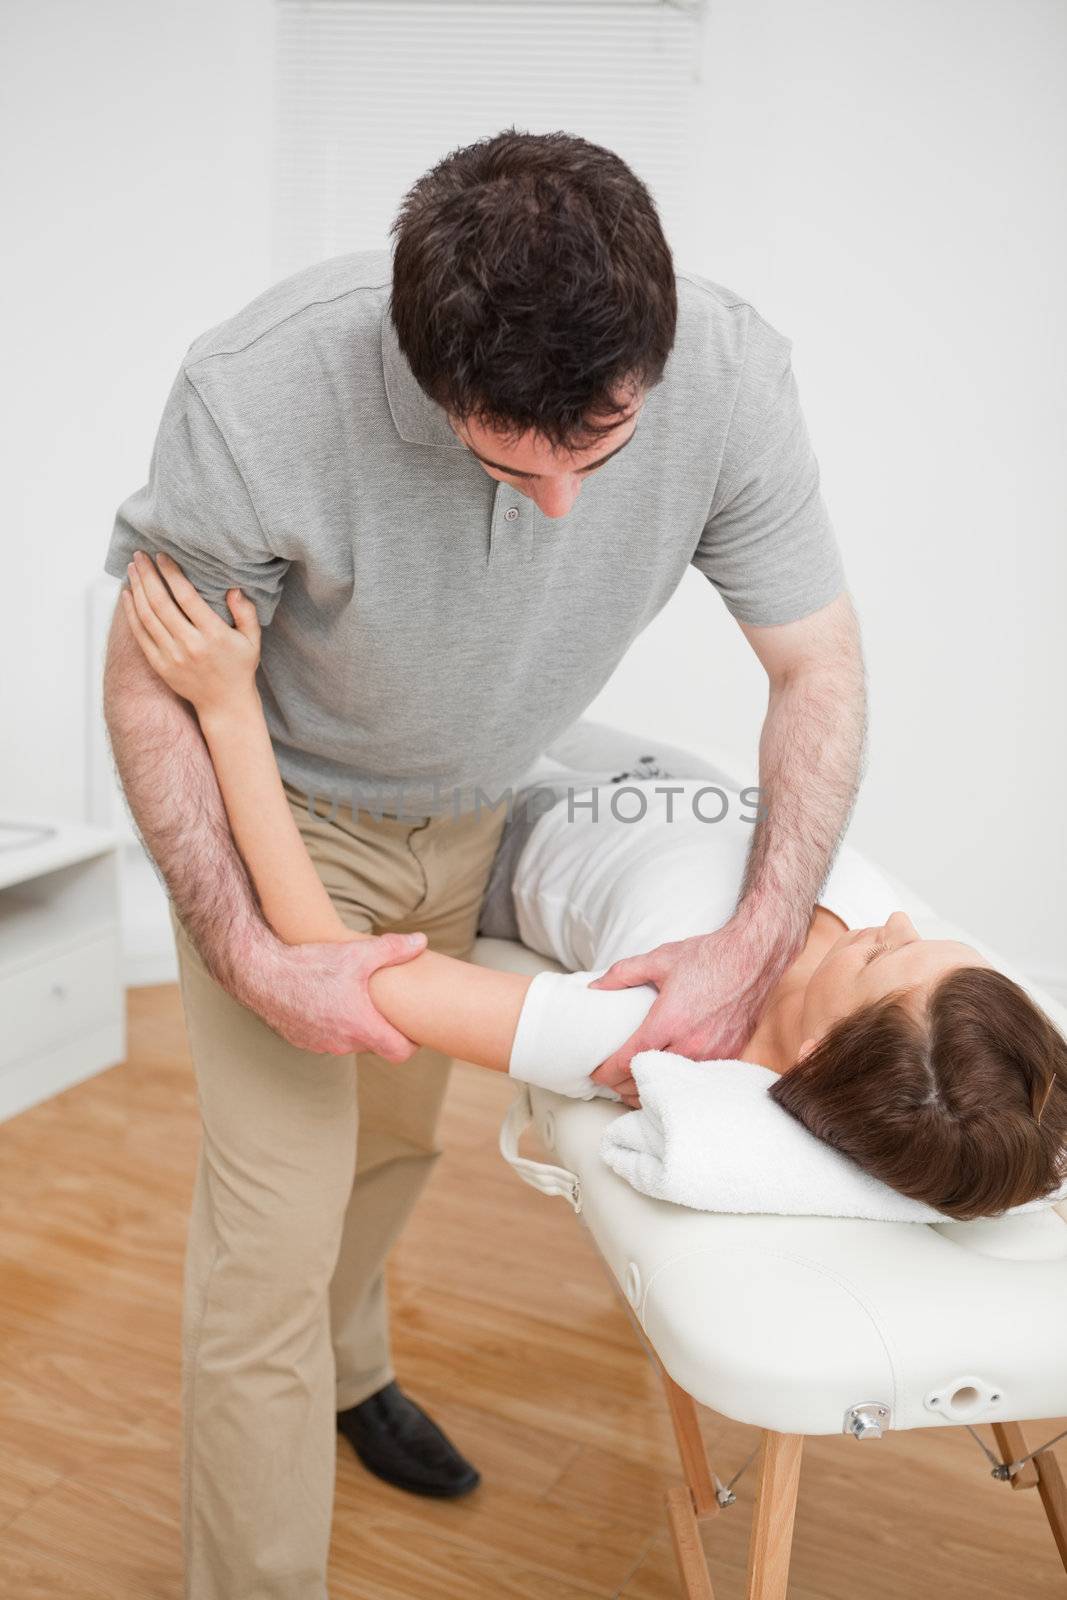 Osteopath working on a shoulder of a patient by Wavebreakmedia